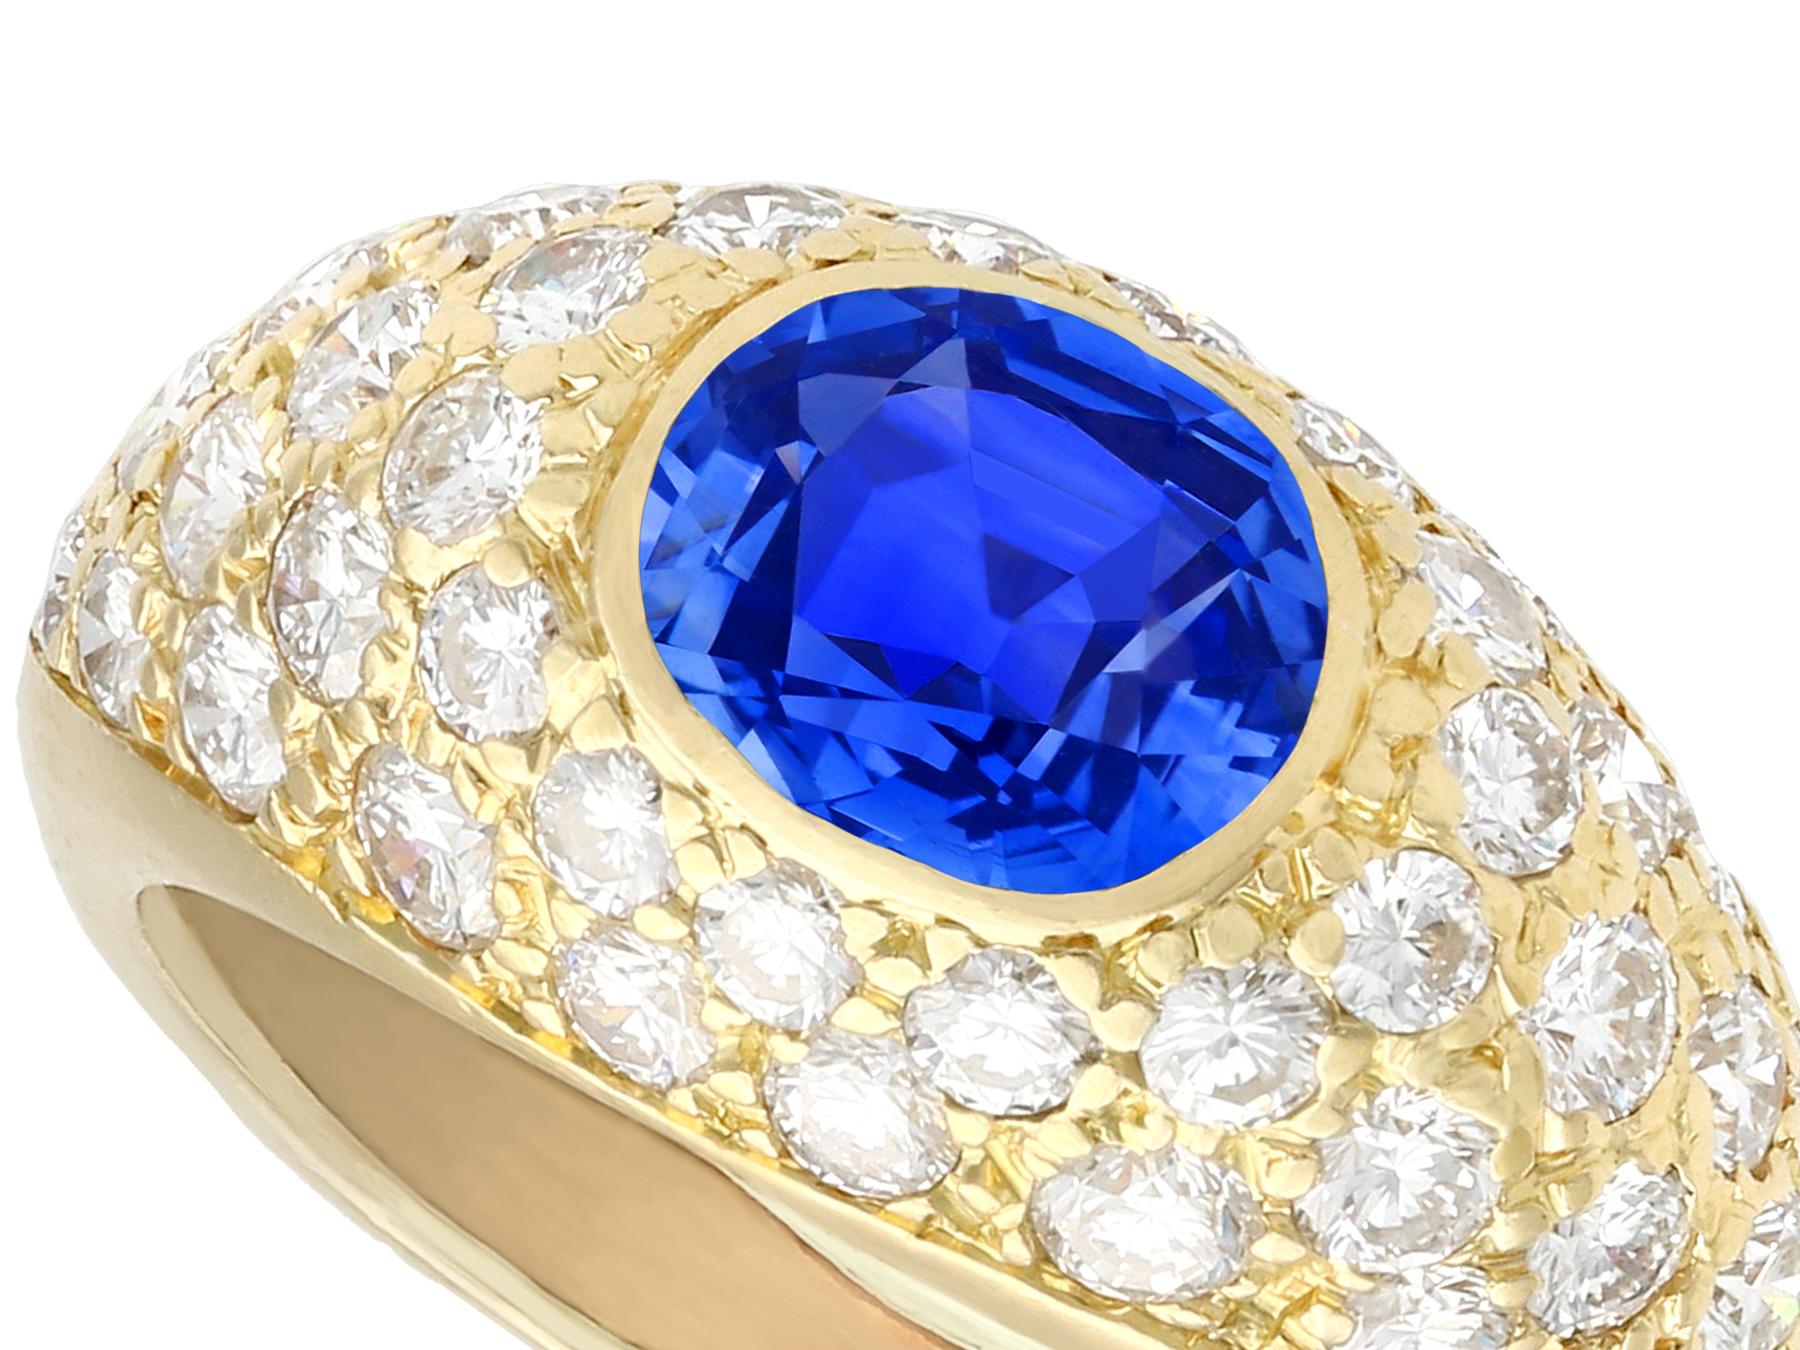 Round Cut 1.60 Carat Oval Cut Sapphire 1.20 Carat Diamond 18k Yellow Gold Cocktail Ring For Sale